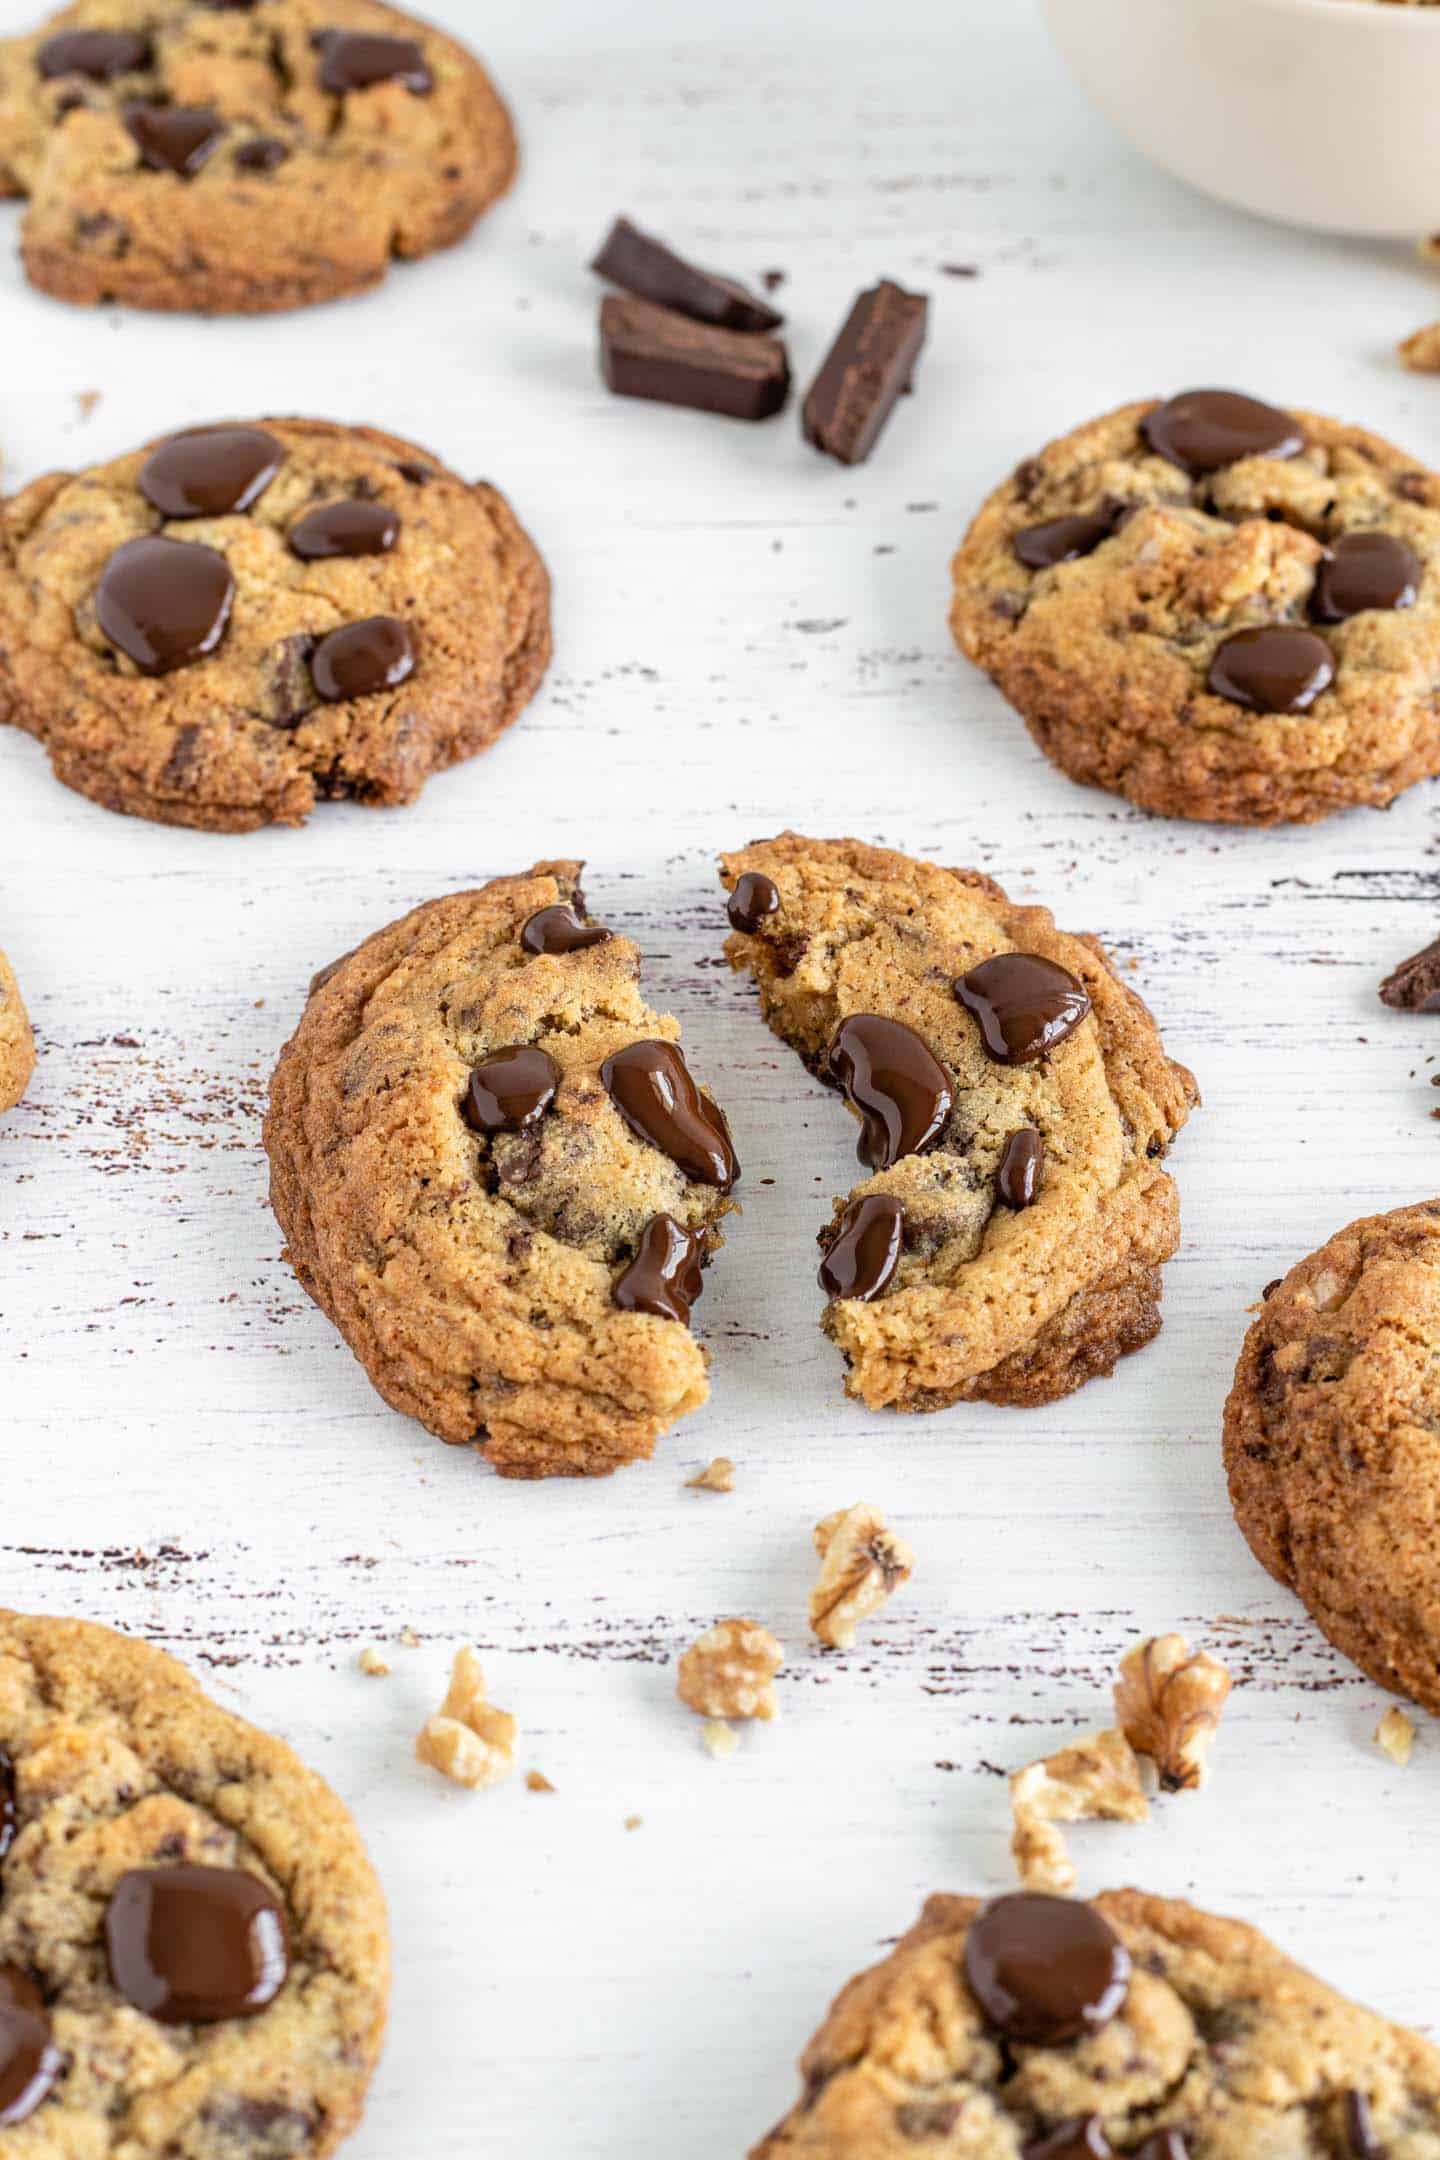 Close shot of the Walnuts and Choc Chunks Cookies on a white background A cookie cut in half